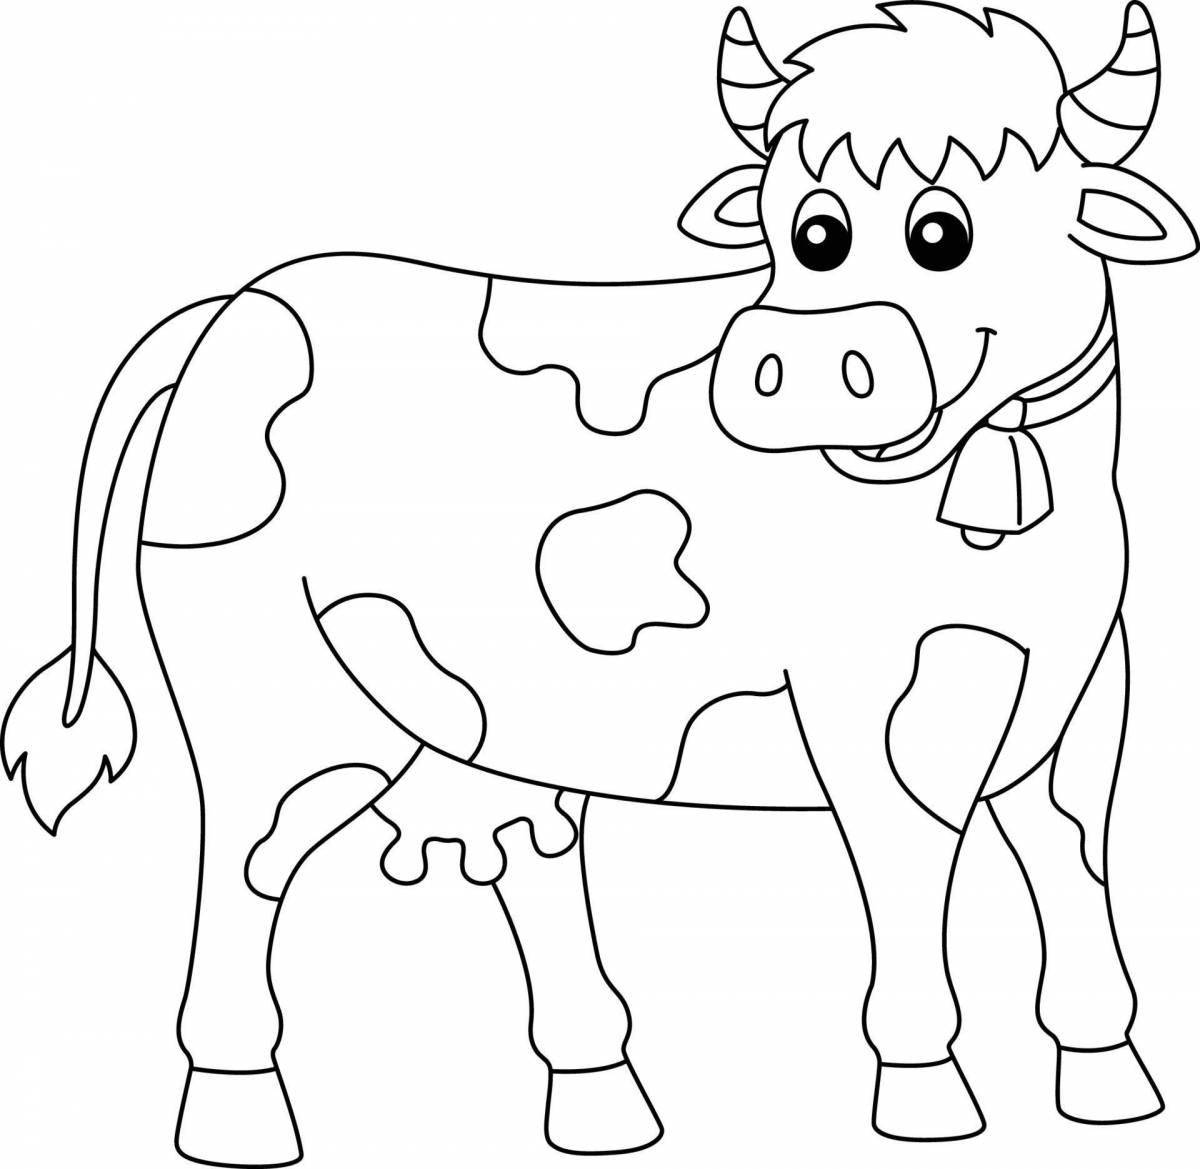 Amazing cow and calf coloring book